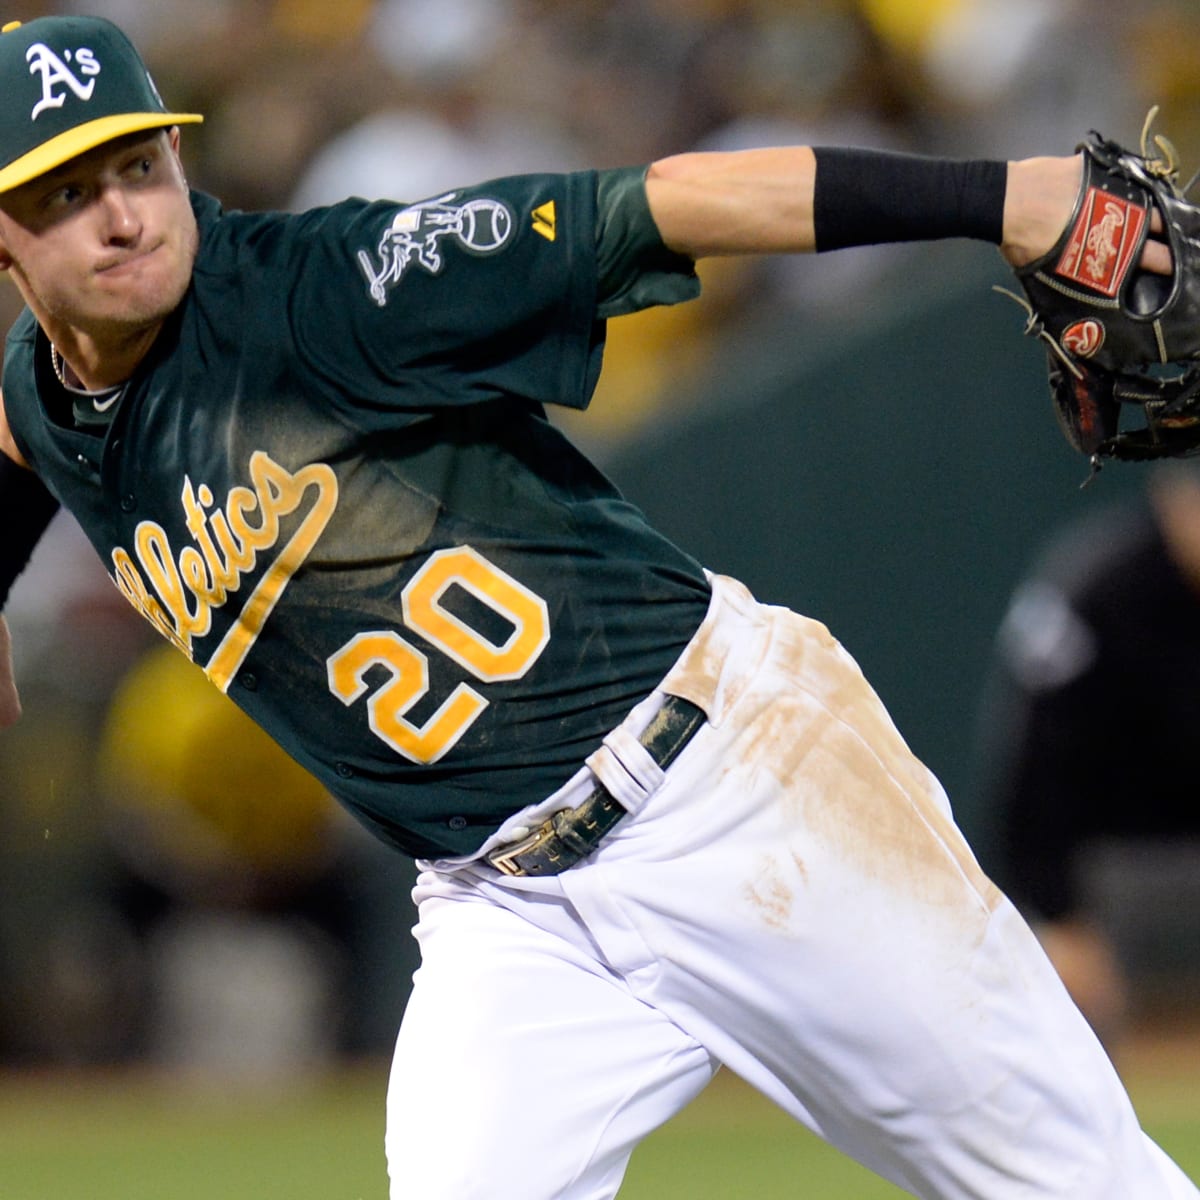 Josh Donaldson a hit in A's intrasquad game